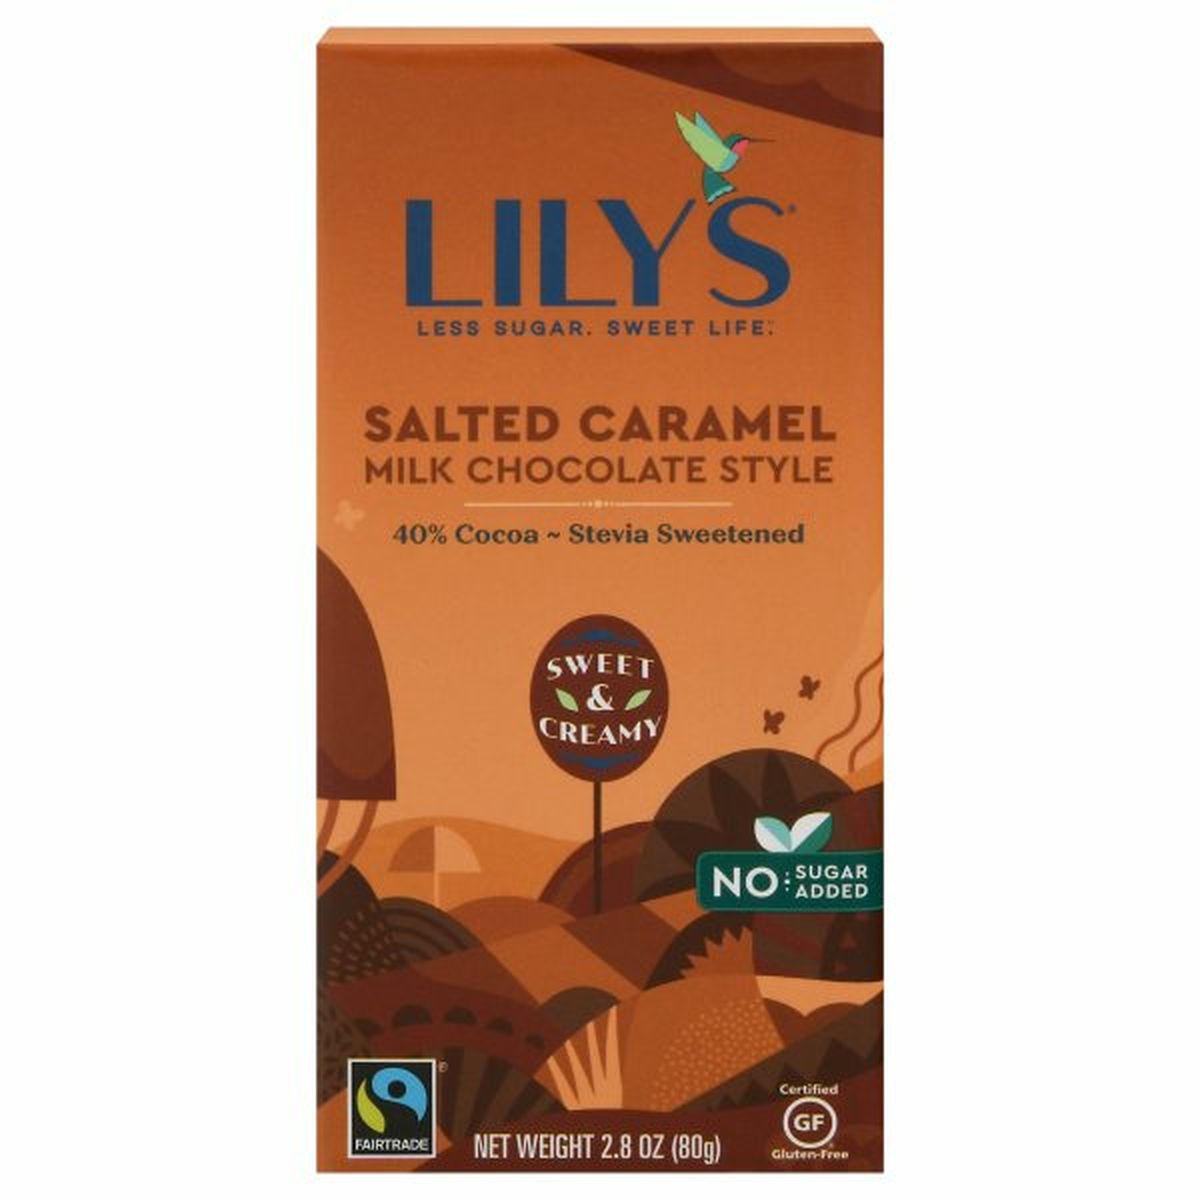 Calories in Lily's Milk Chocolate Style, Salted Caramel, 40% Cocoa